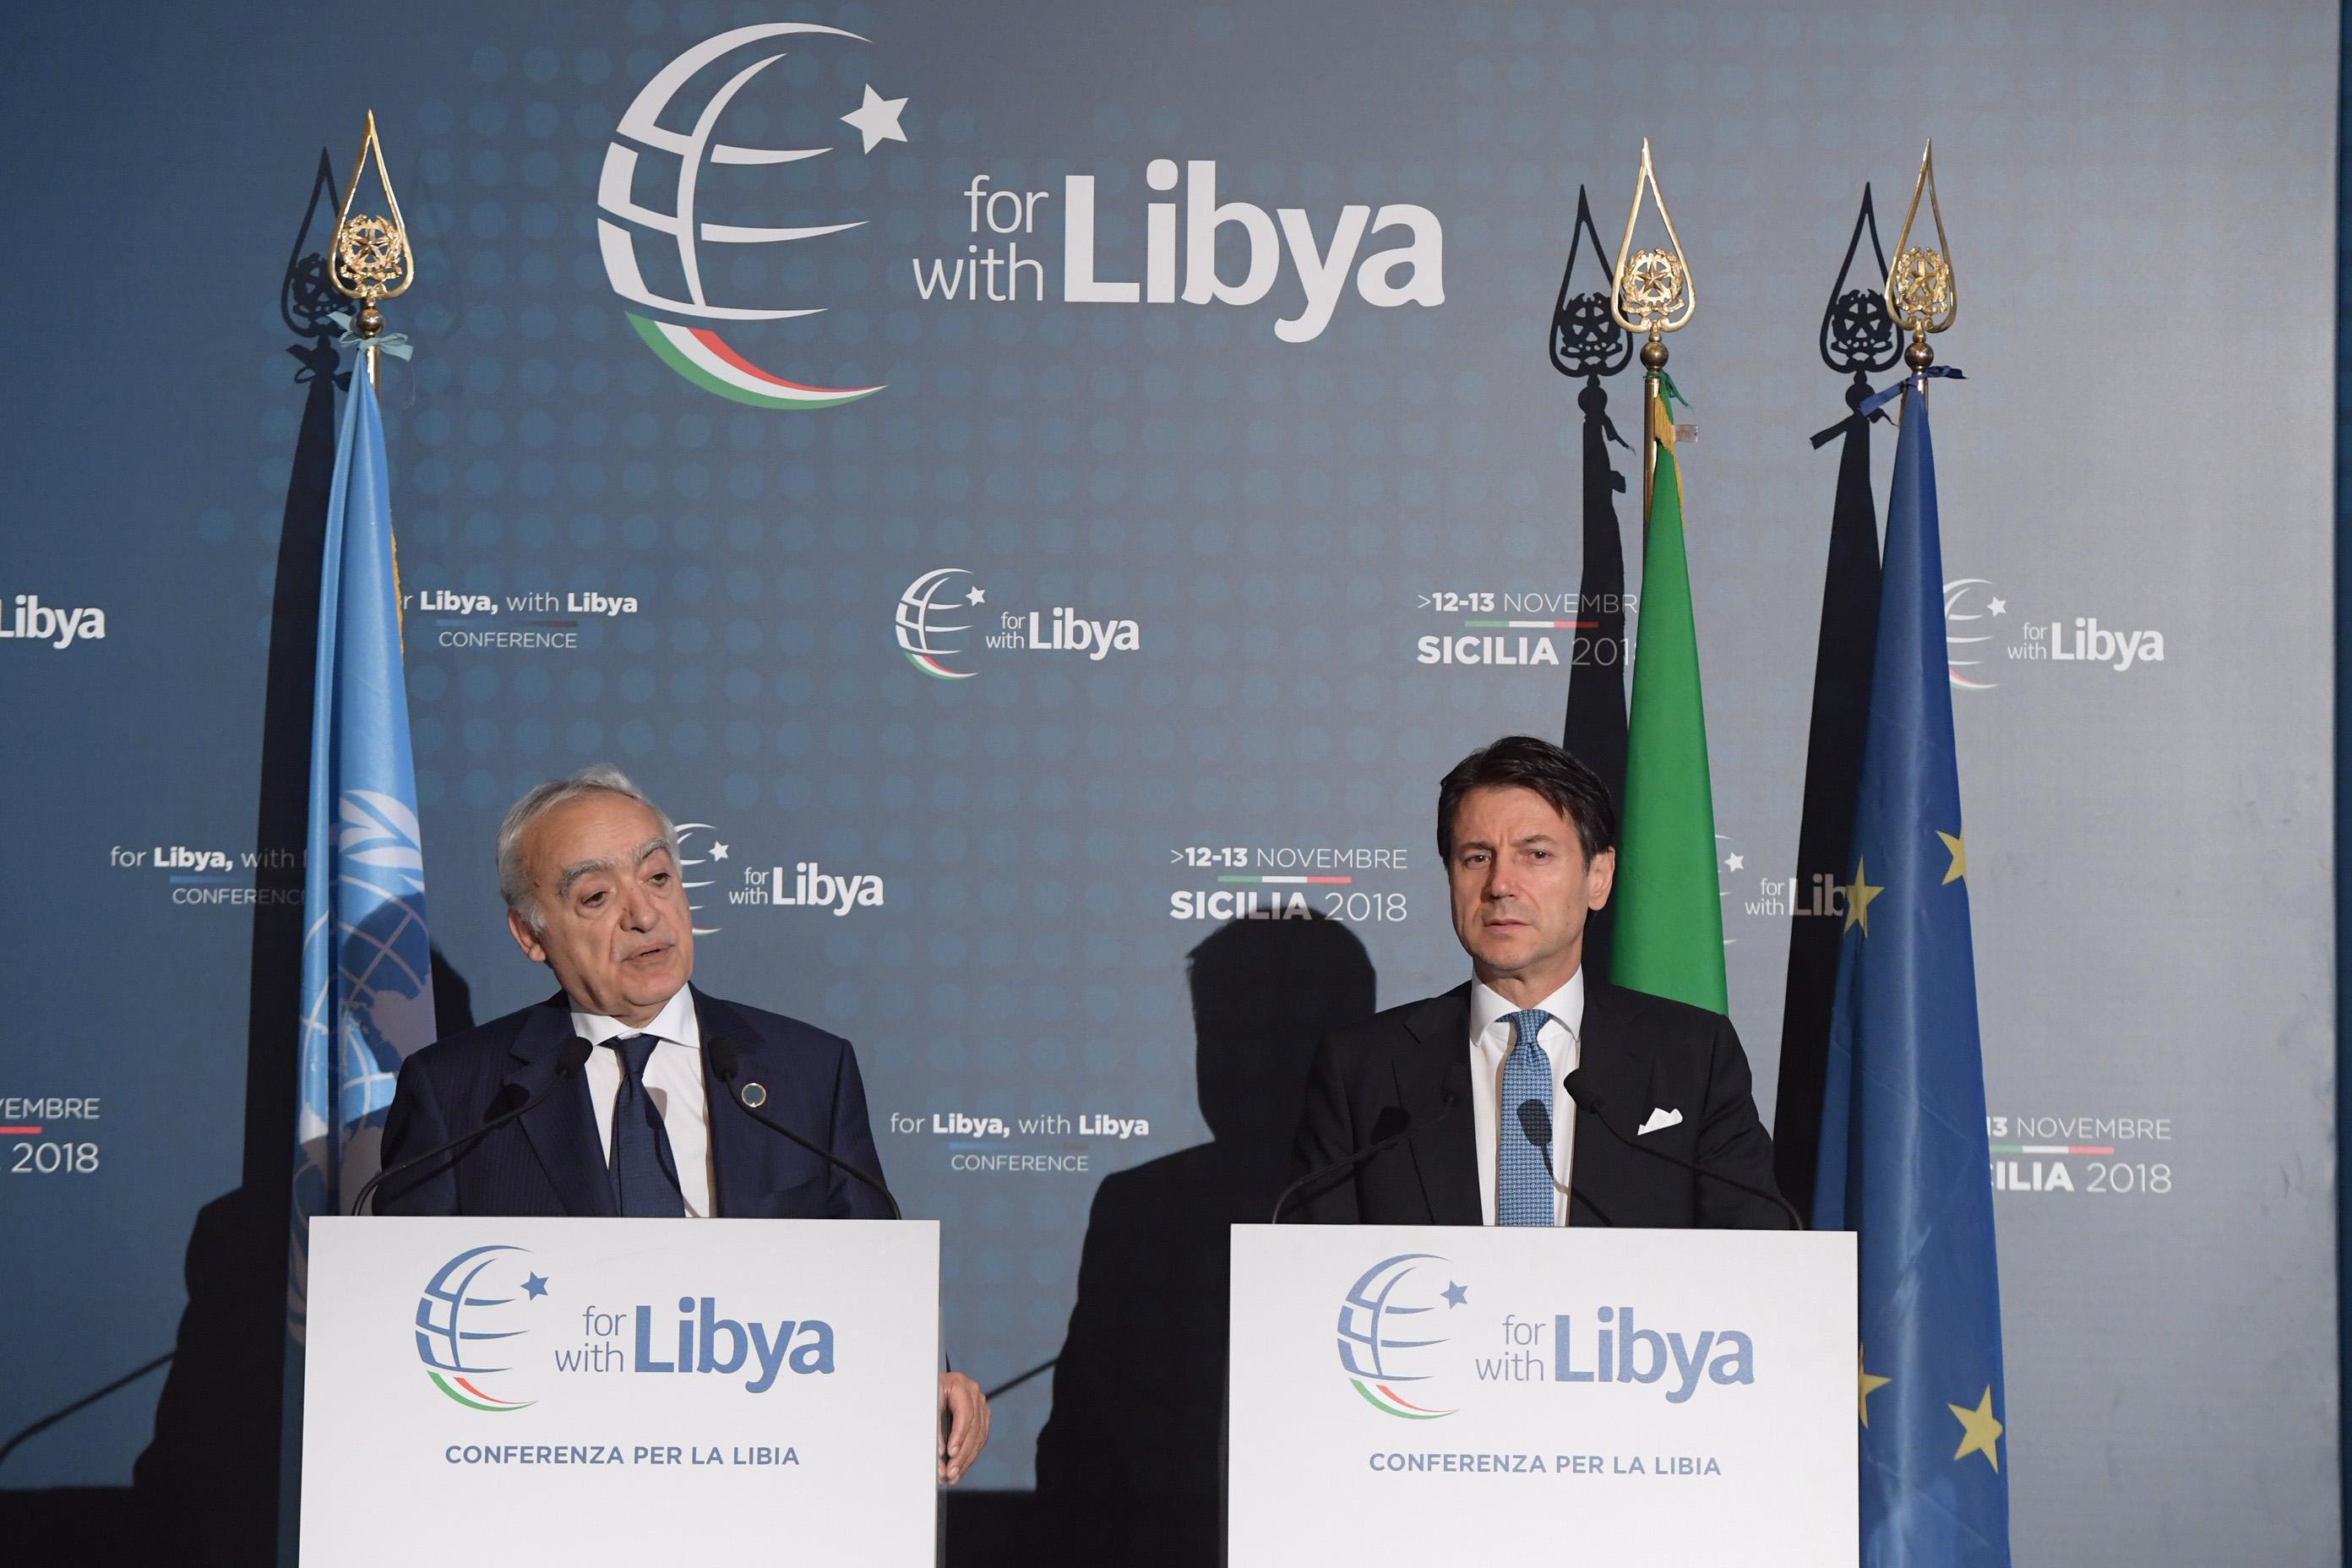 epa07163236 A handout photo made available by the Chigi Palace Press Office shows UN special envoy for Libya Ghassam Salame (L) and Italian Prime Minister Giuseppe Conte during a press conference at the end of the two-day 'Conference on Libya' in Palermo, Sicily island, southern Italy, 13 November 2018.  EPA/FILIPPO ATTILI / CHIGI PALACE PRESS OFFICE / HANDOUT HANDOUT EDITORIAL USE ONLY/NO SALES HANDOUT EDITORIAL USE ONLY/NO SALES